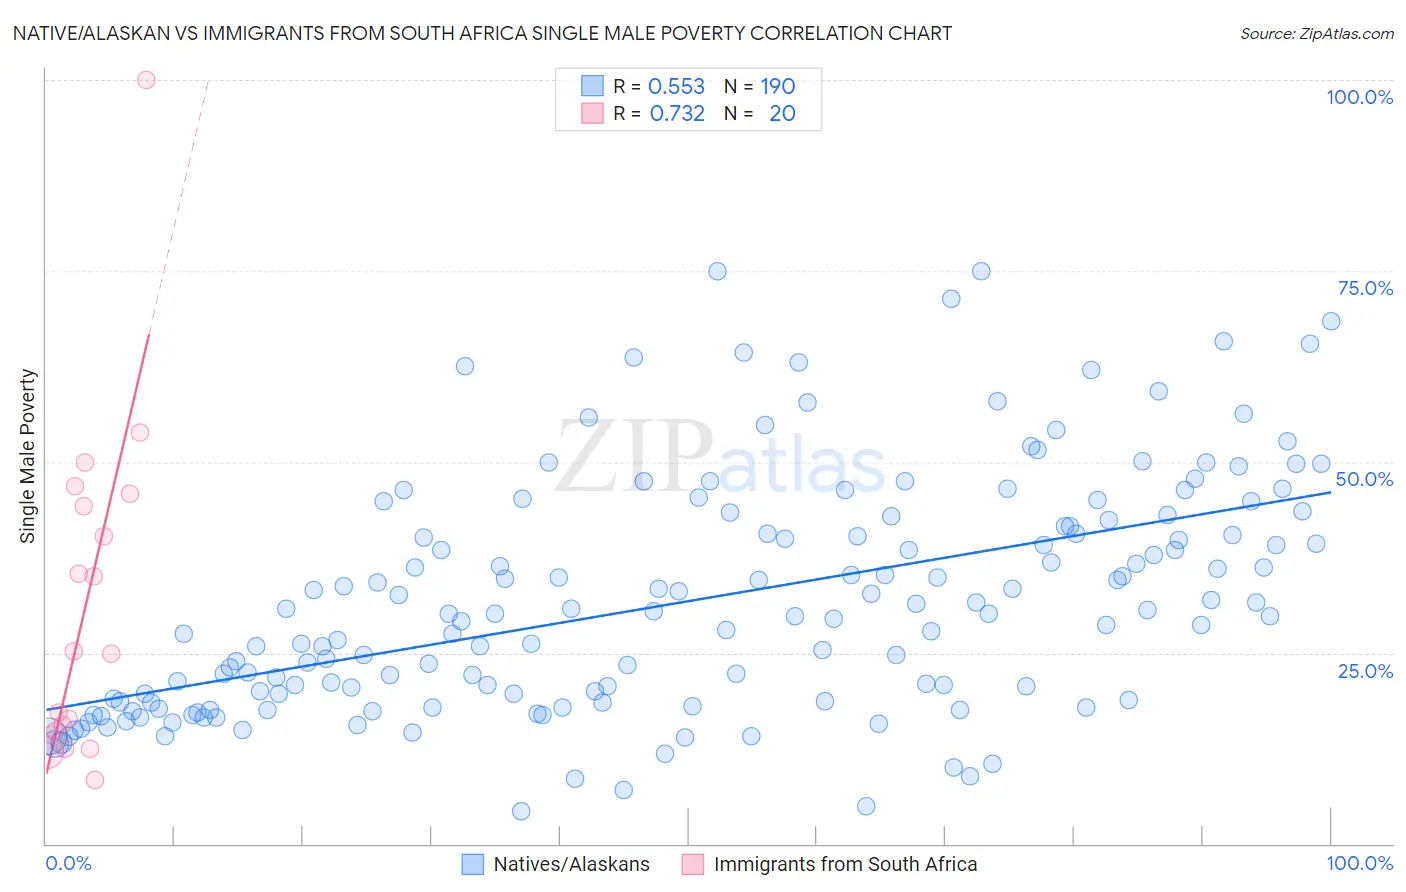 Native/Alaskan vs Immigrants from South Africa Single Male Poverty